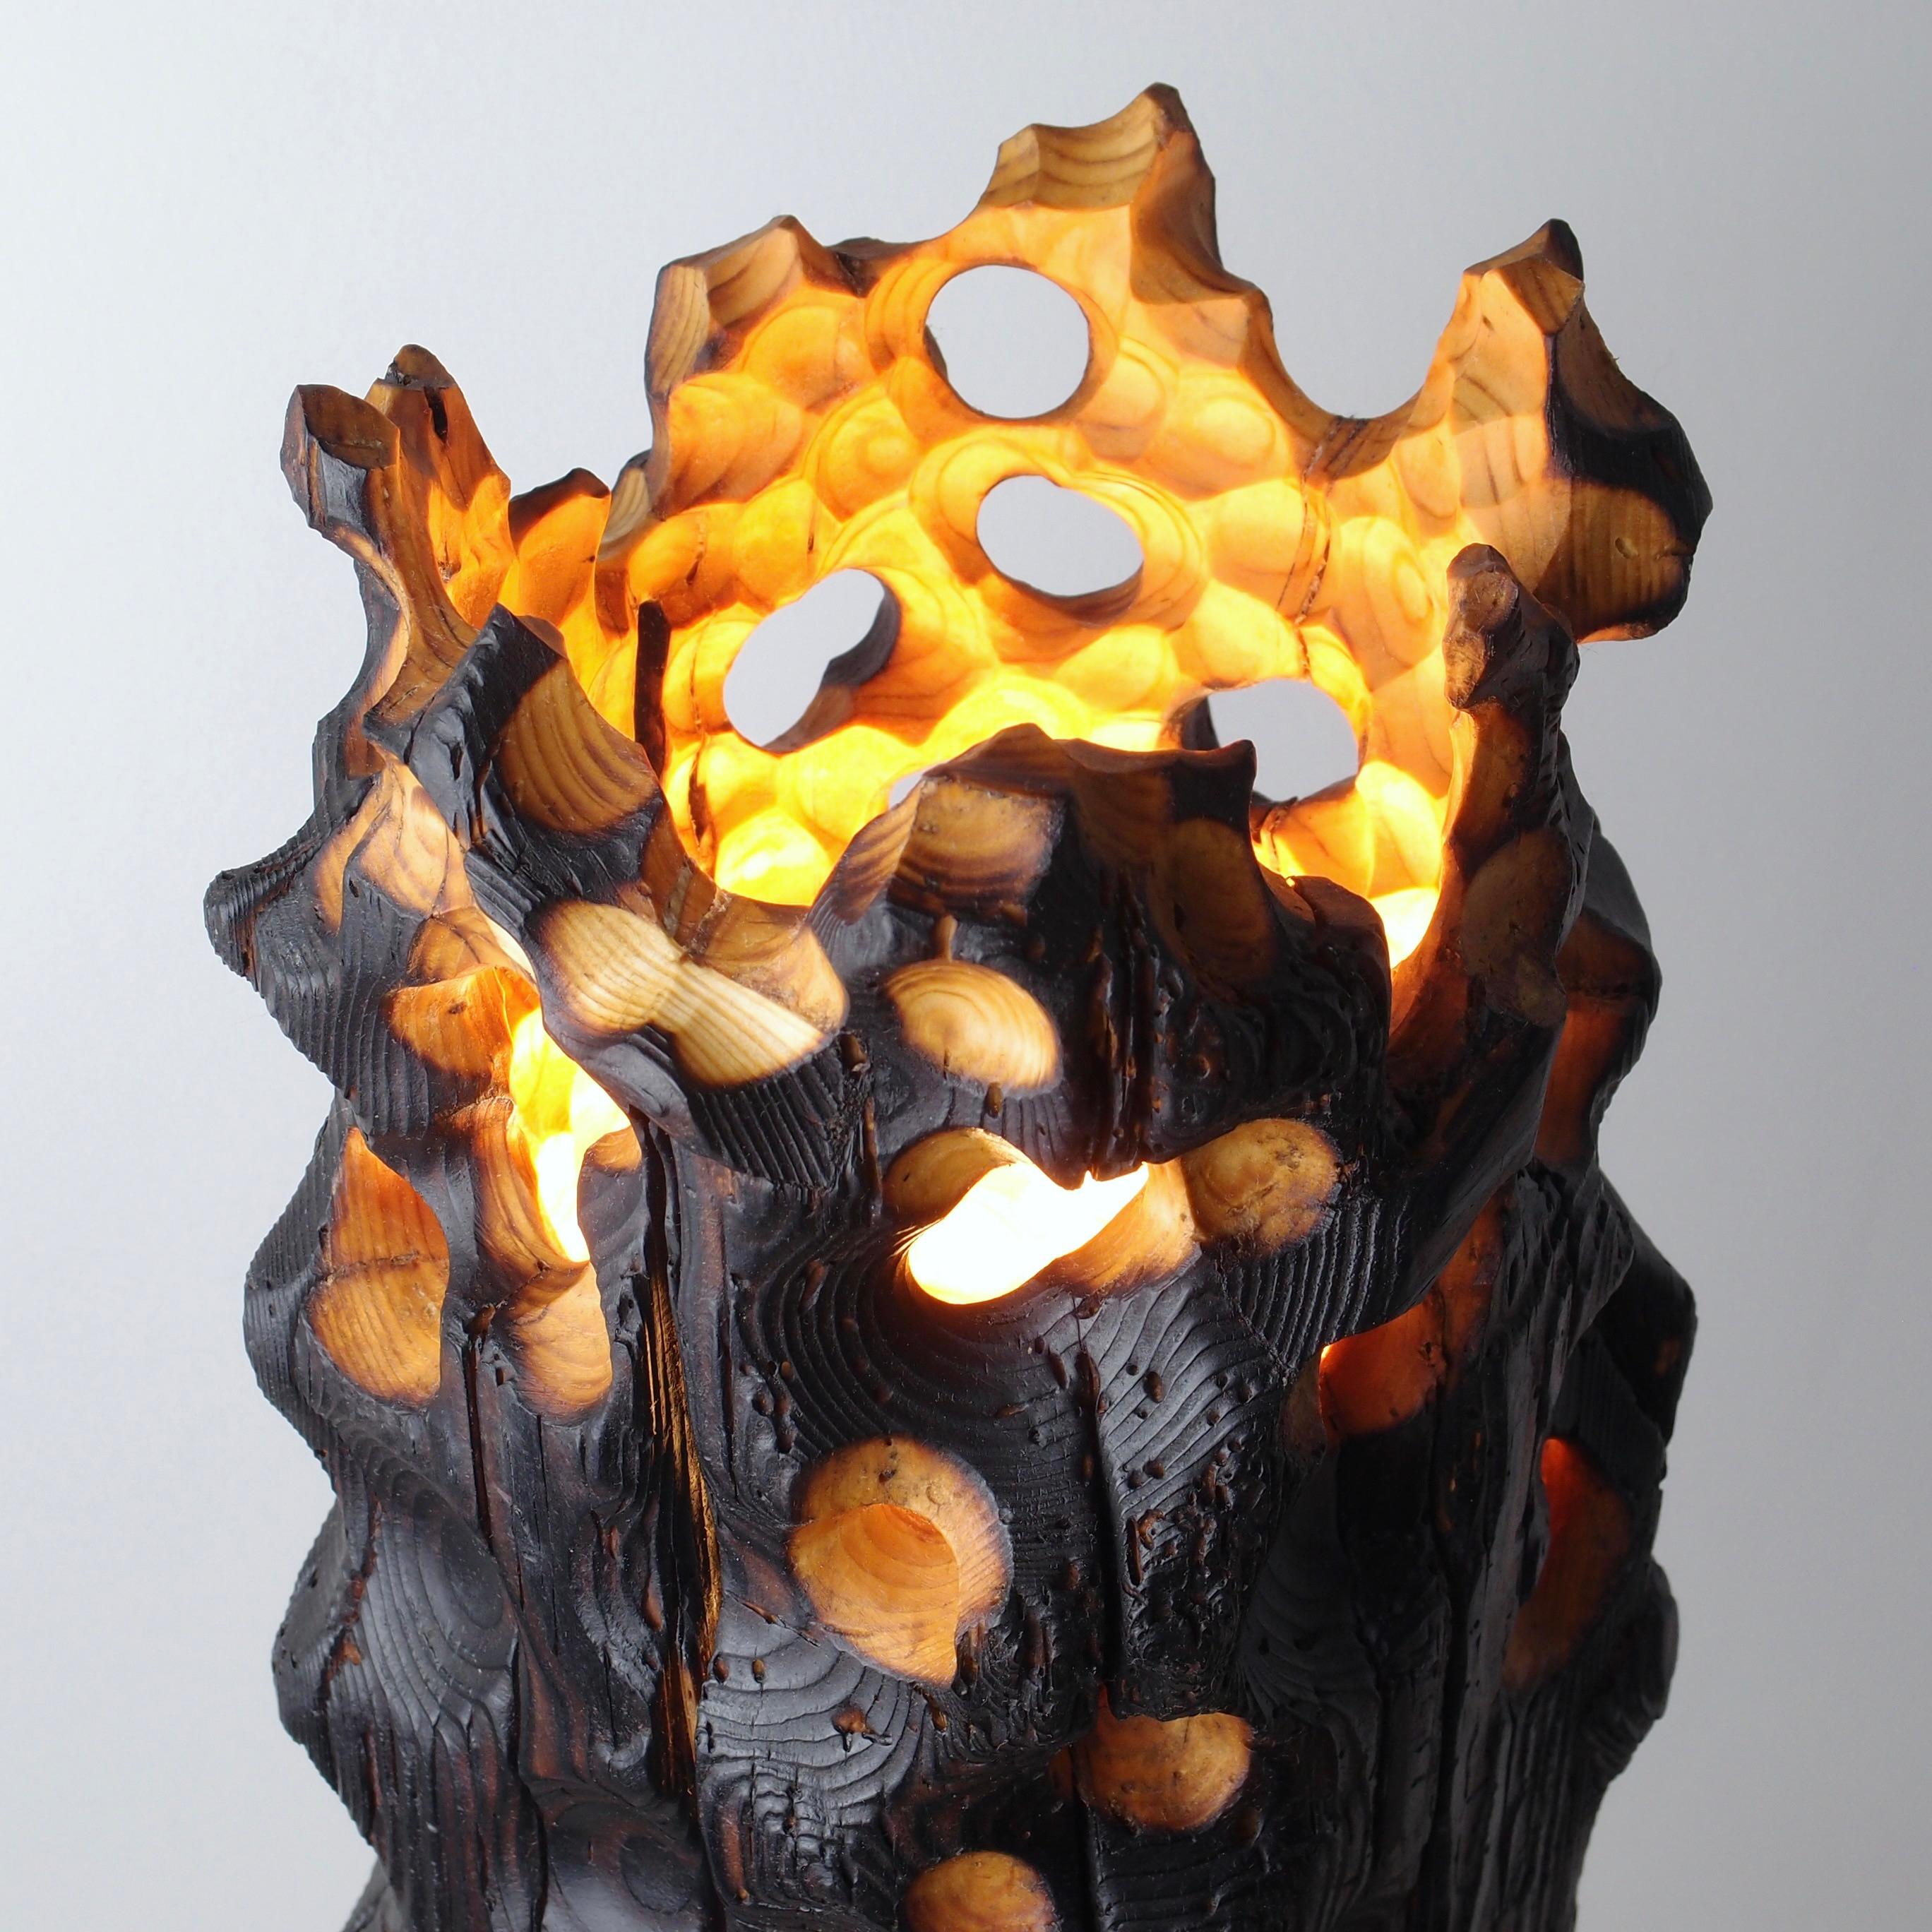 Hungarian Torch, Sculptured Lighting, Table Lamp from Reclaimed Burned Wood and Stone For Sale